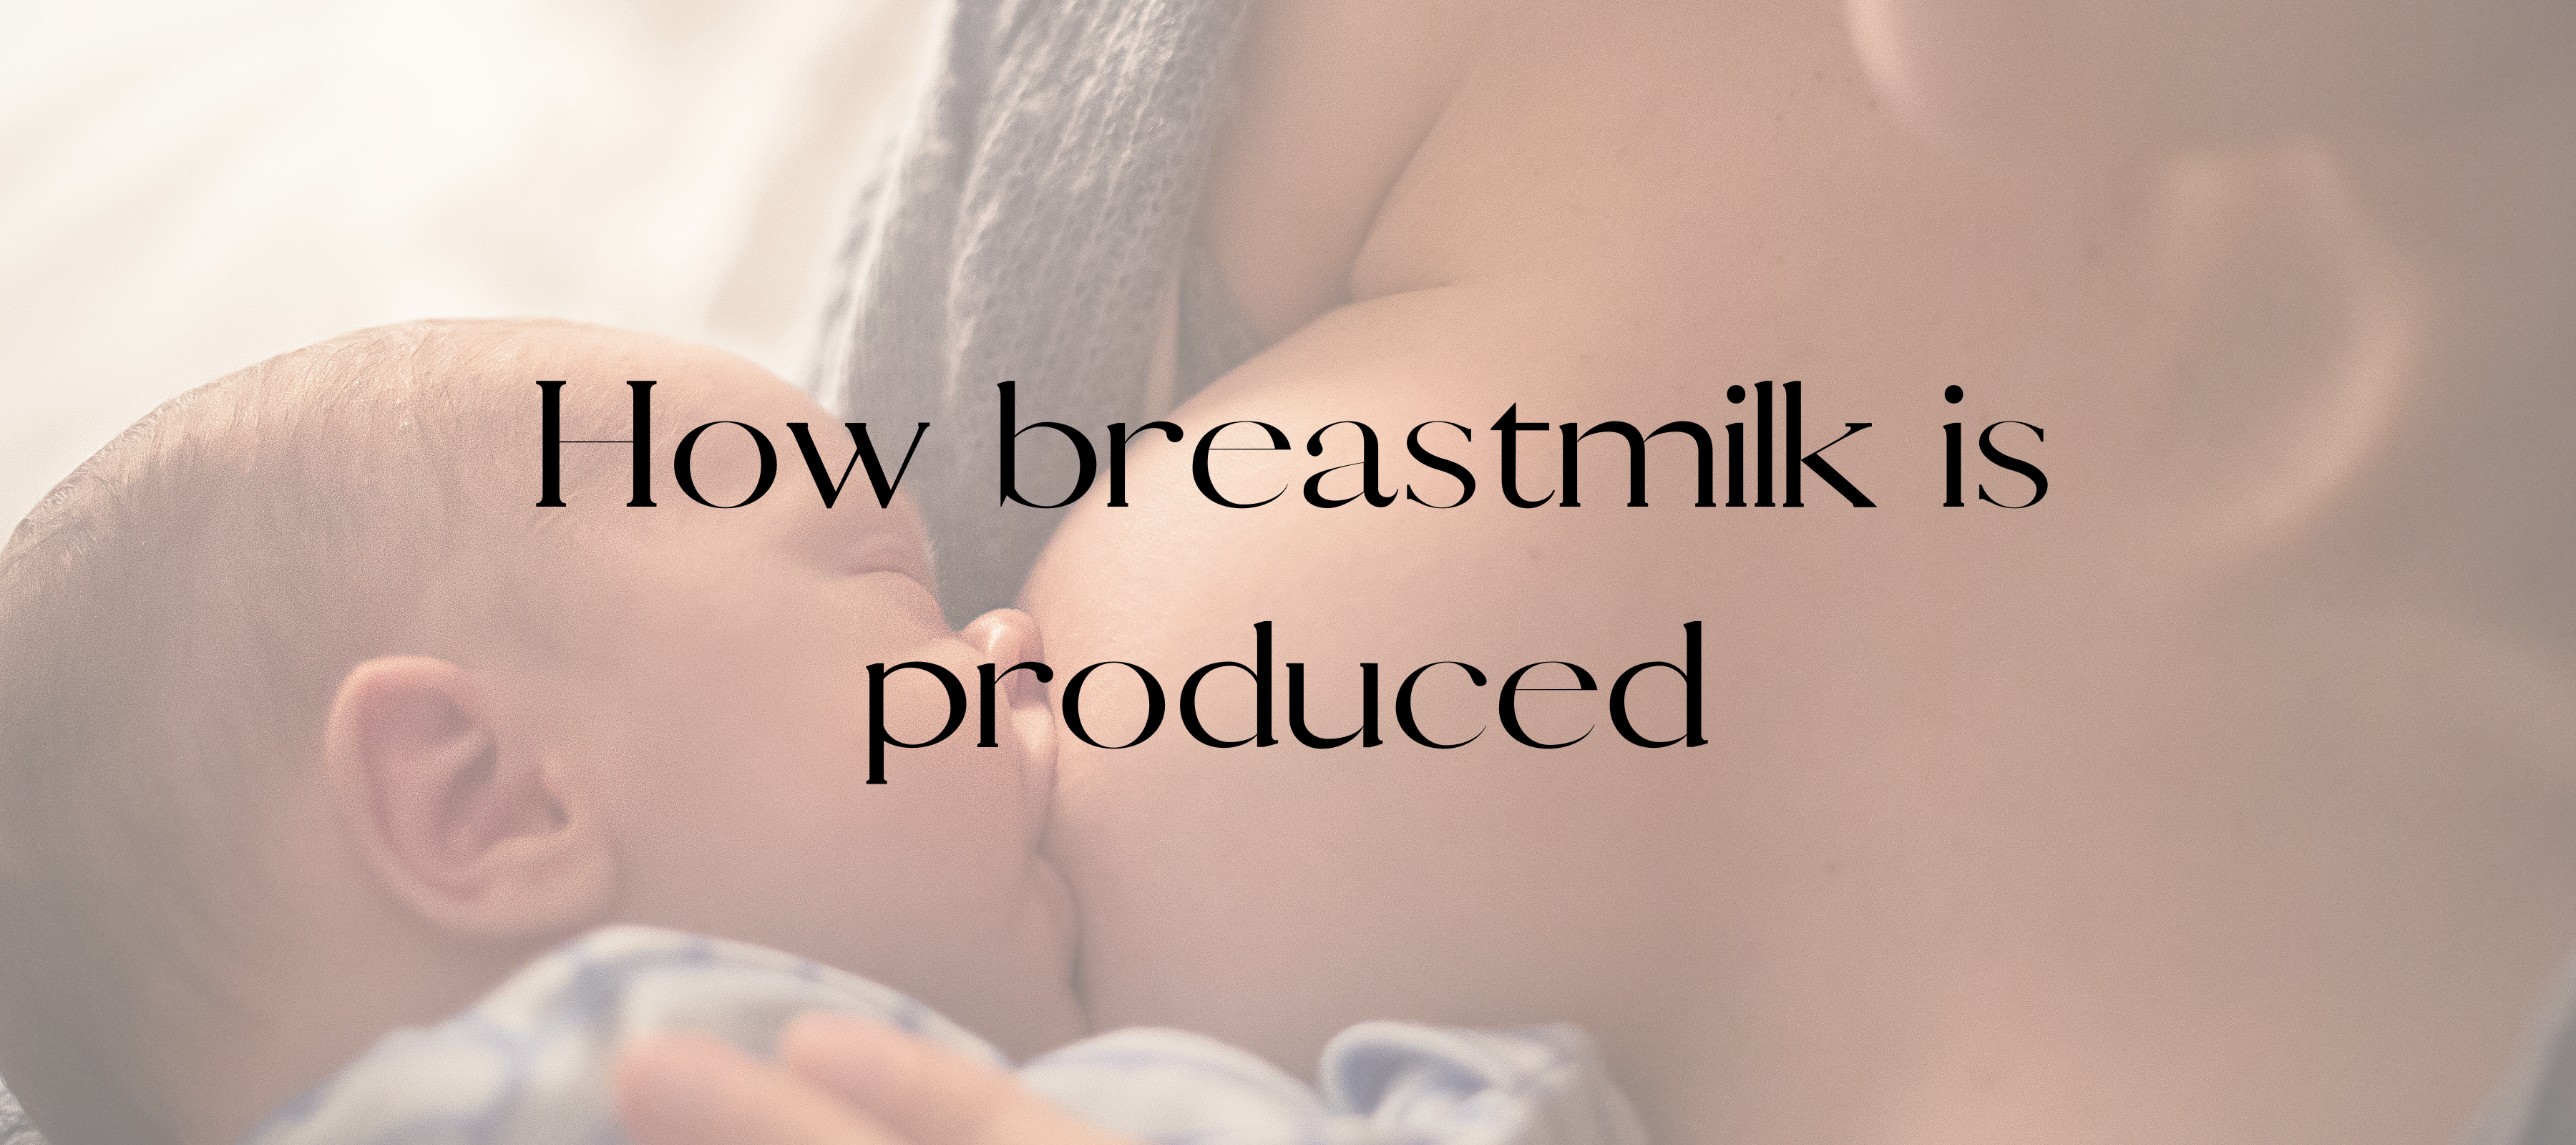 How breastmilk is produced